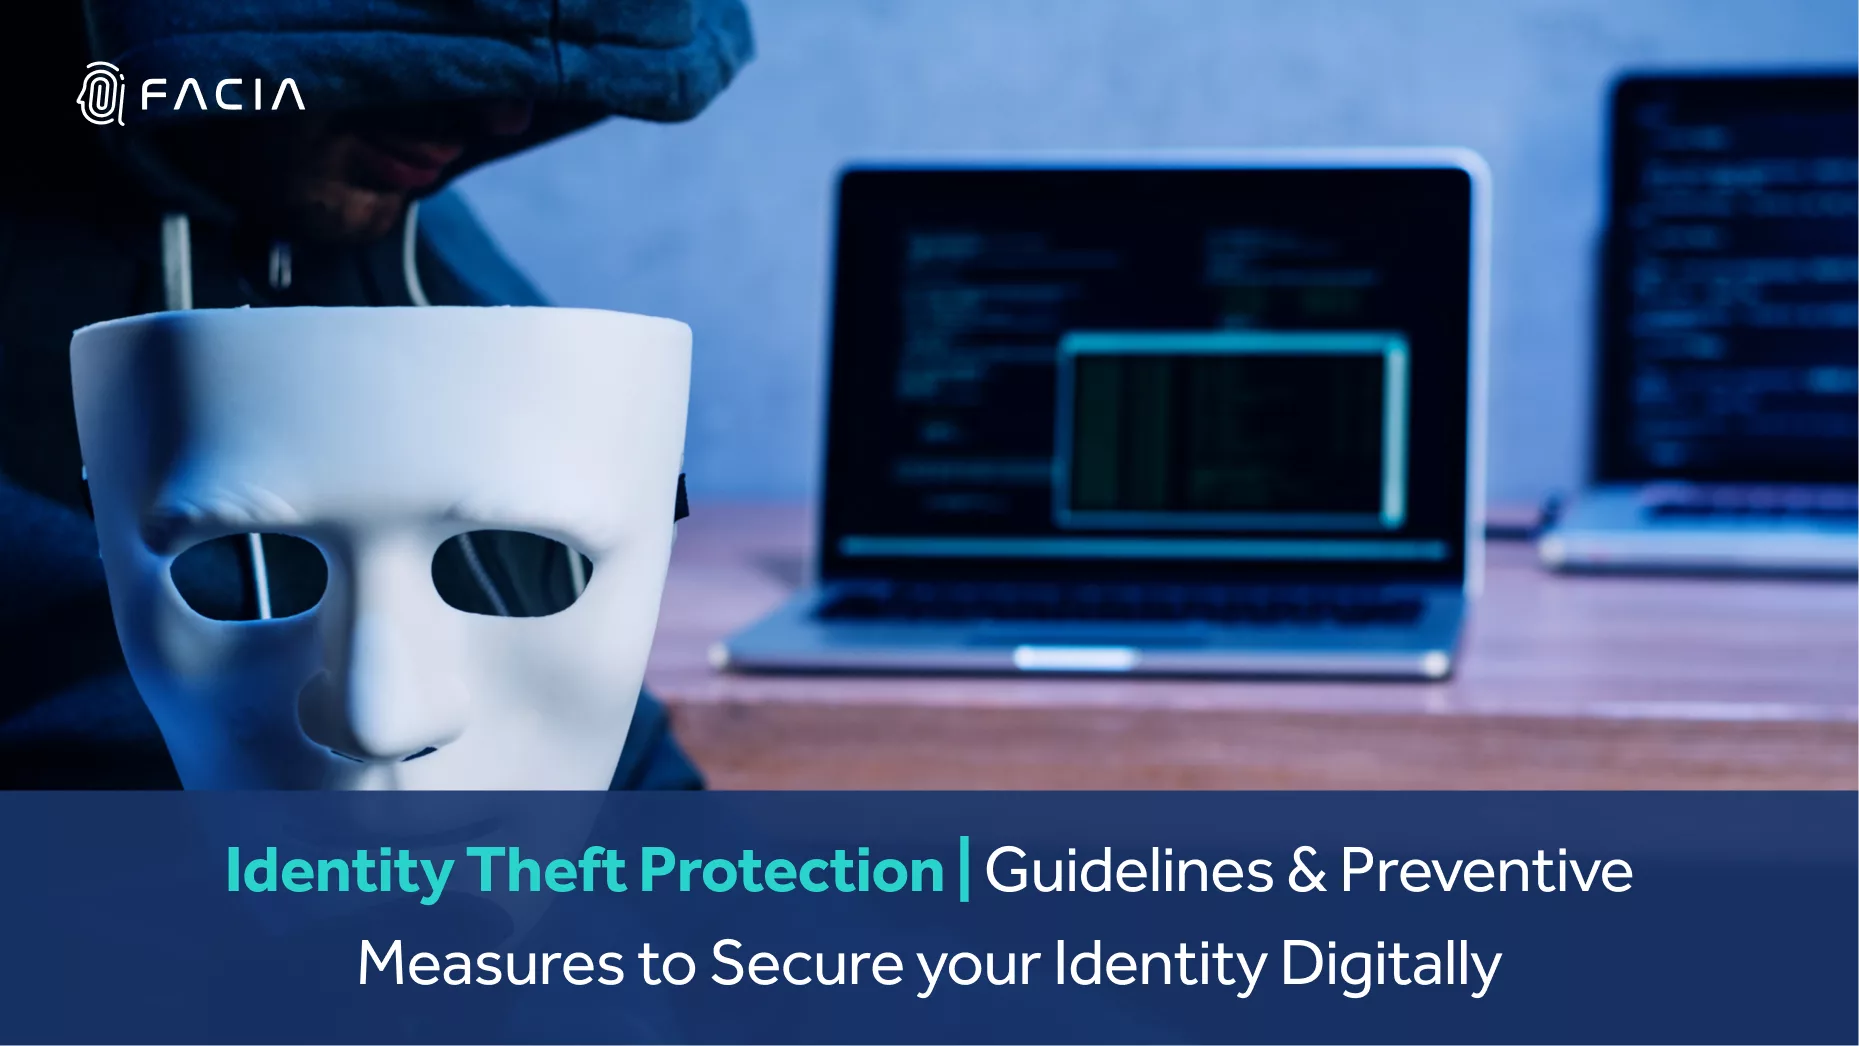 Identity Theft Protection | Guidelines & Preventive Measures to Secure Your Identity Digitally